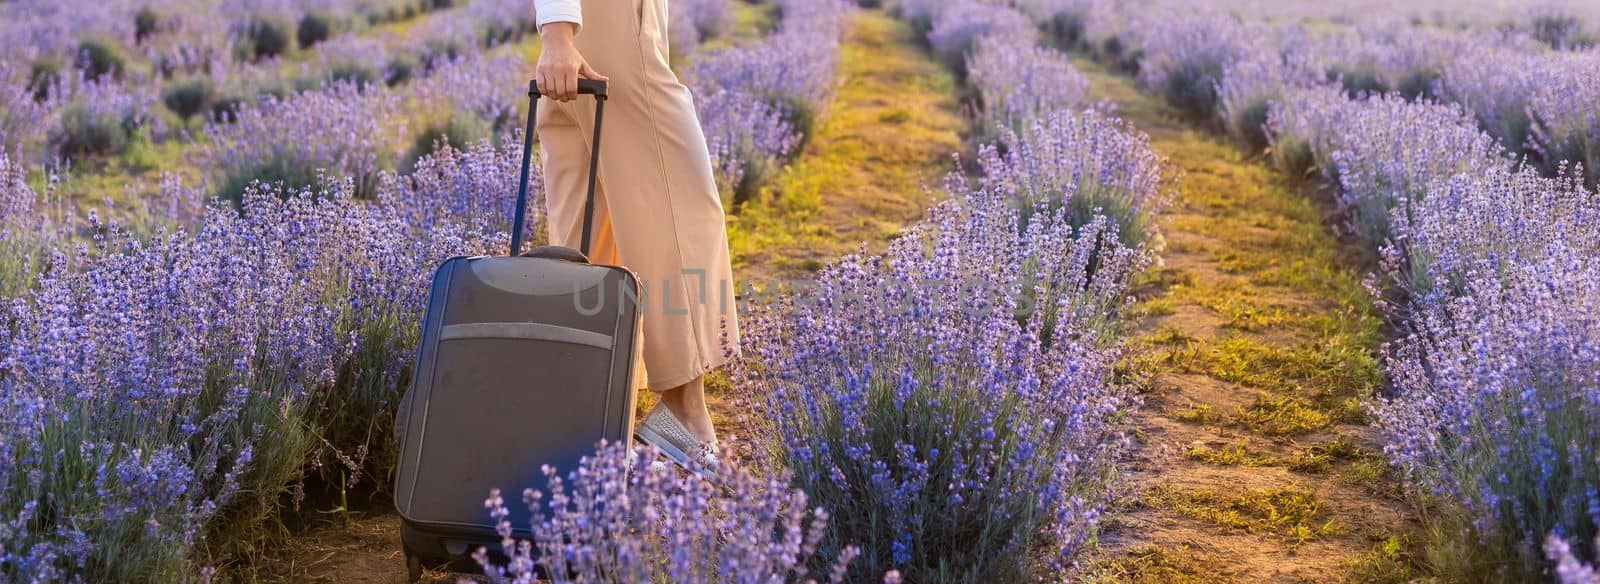 Full length portrait of pretty young lady, wearing light dress, straw hat, walking with bag in summer flowering lavender field, enjoying scent of lavender by Andelov13